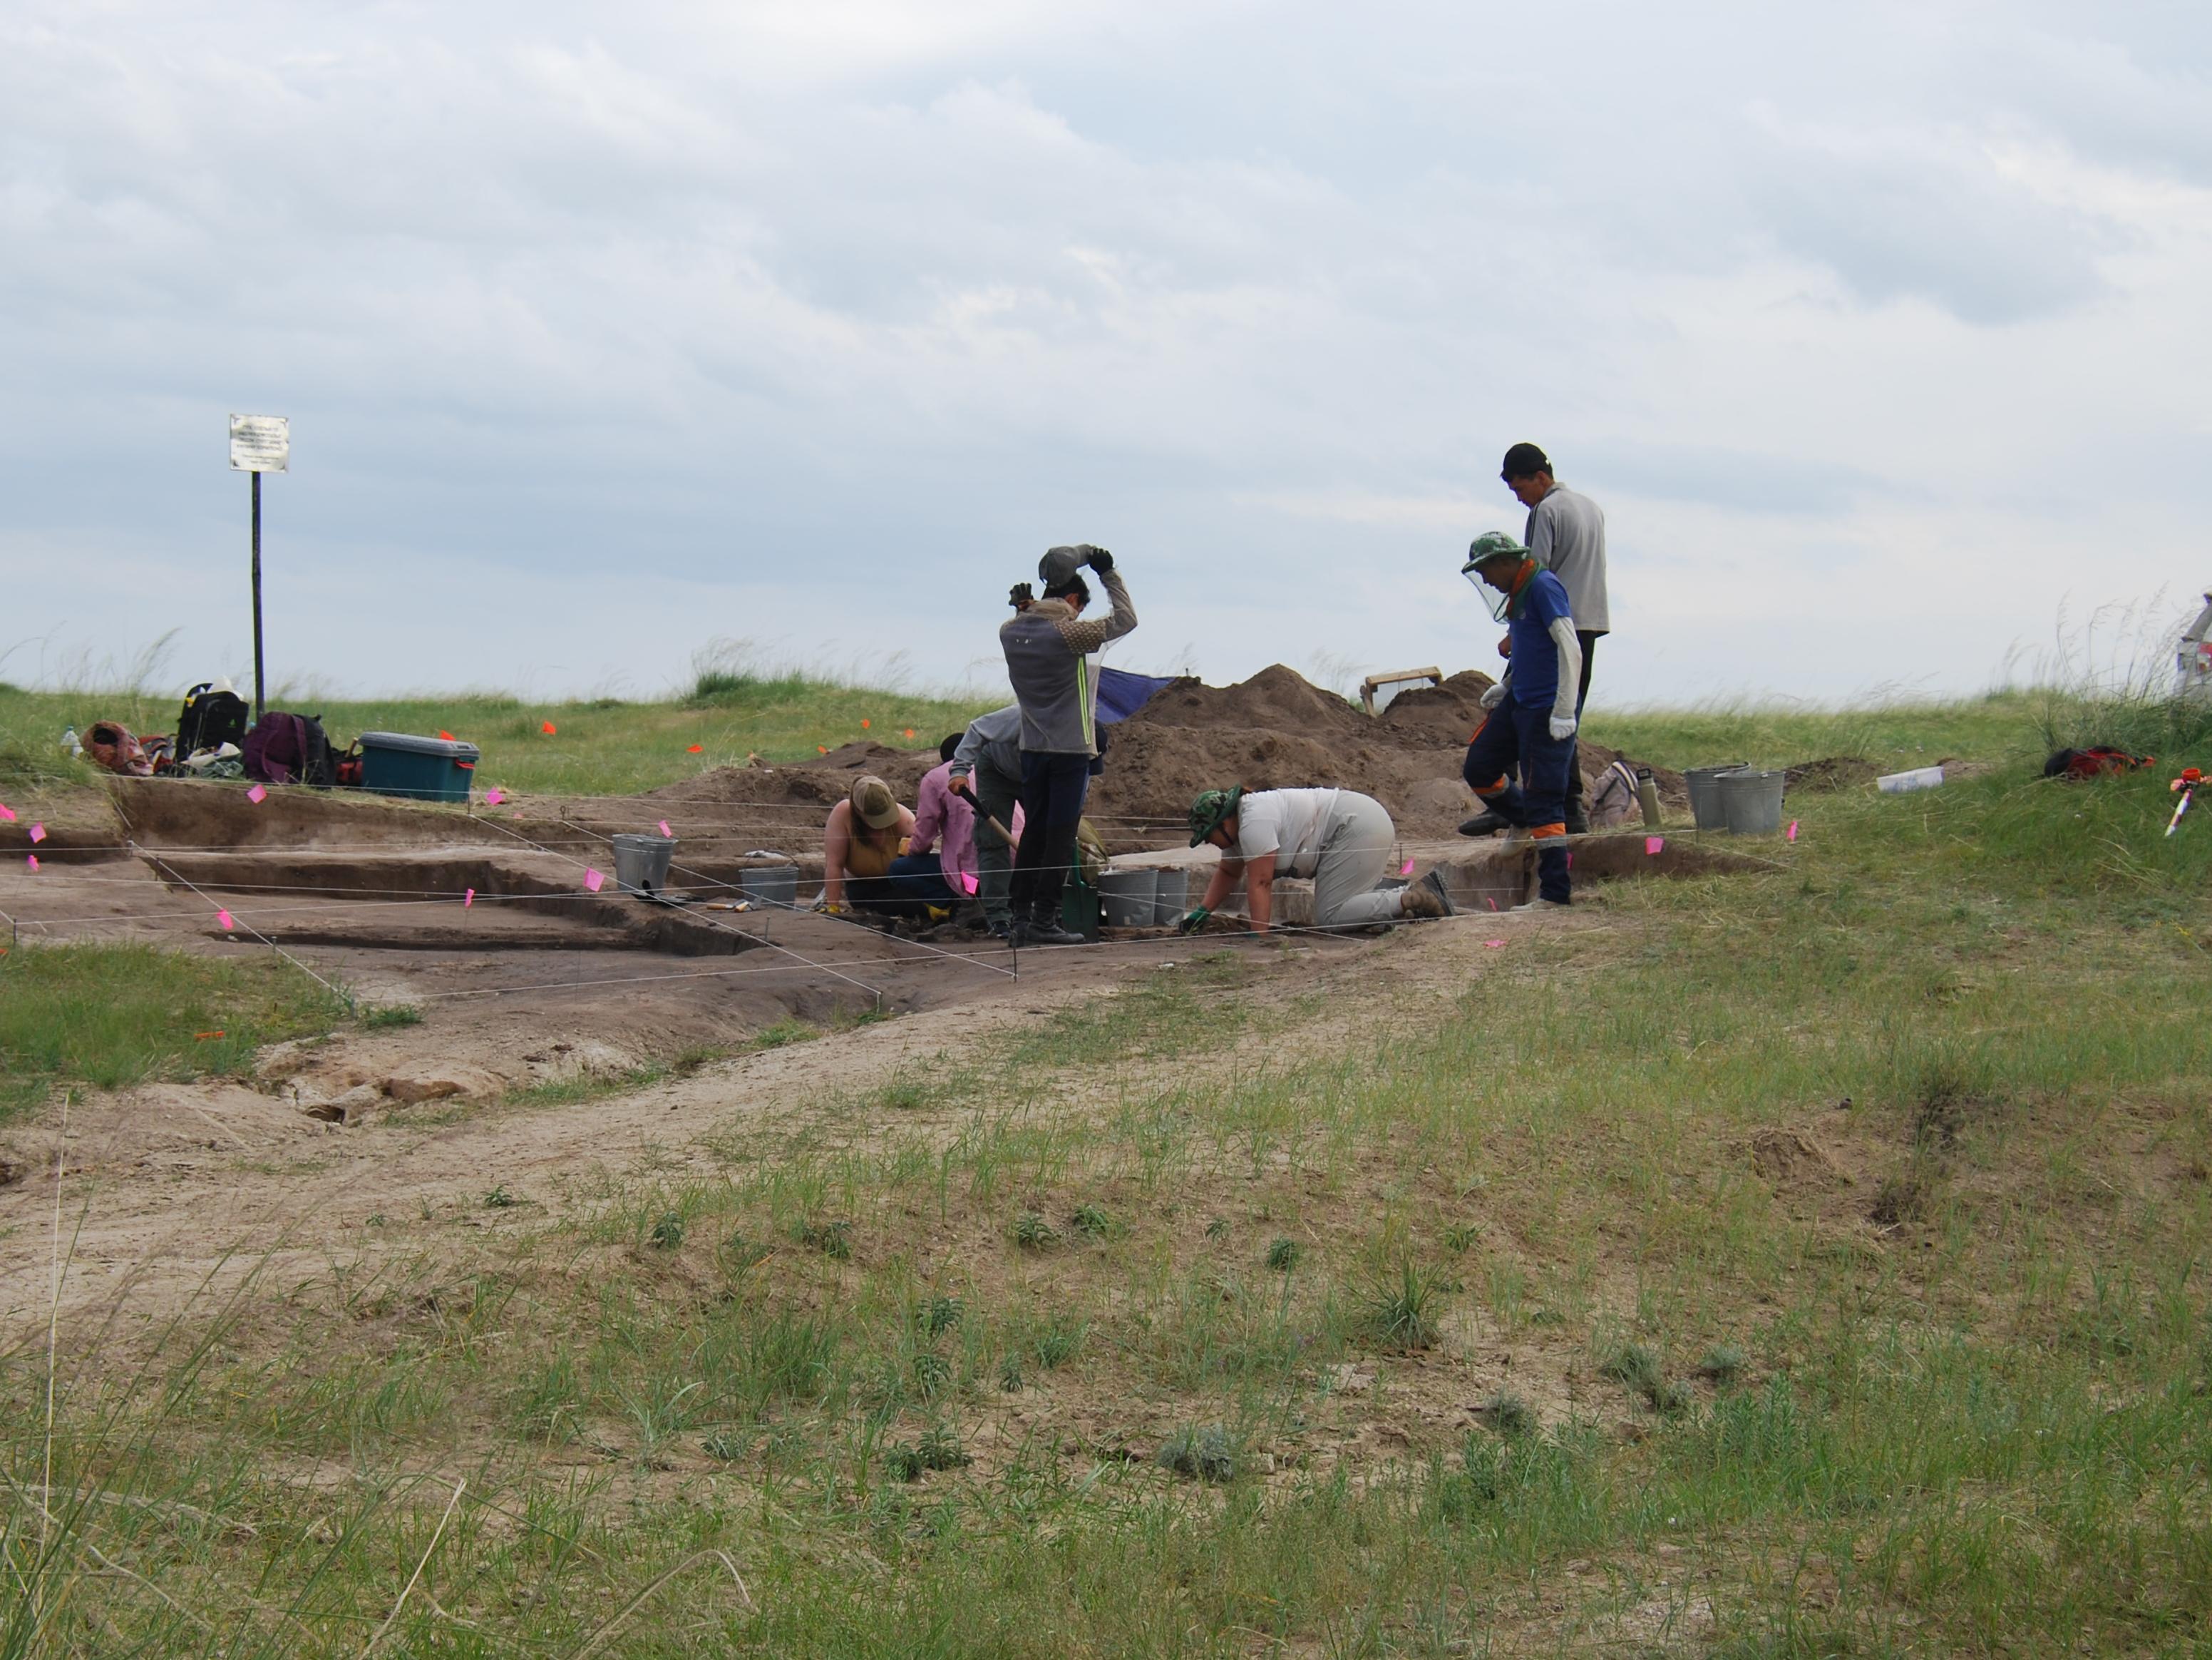 Archaeologists digging on the Mongolian Steppe